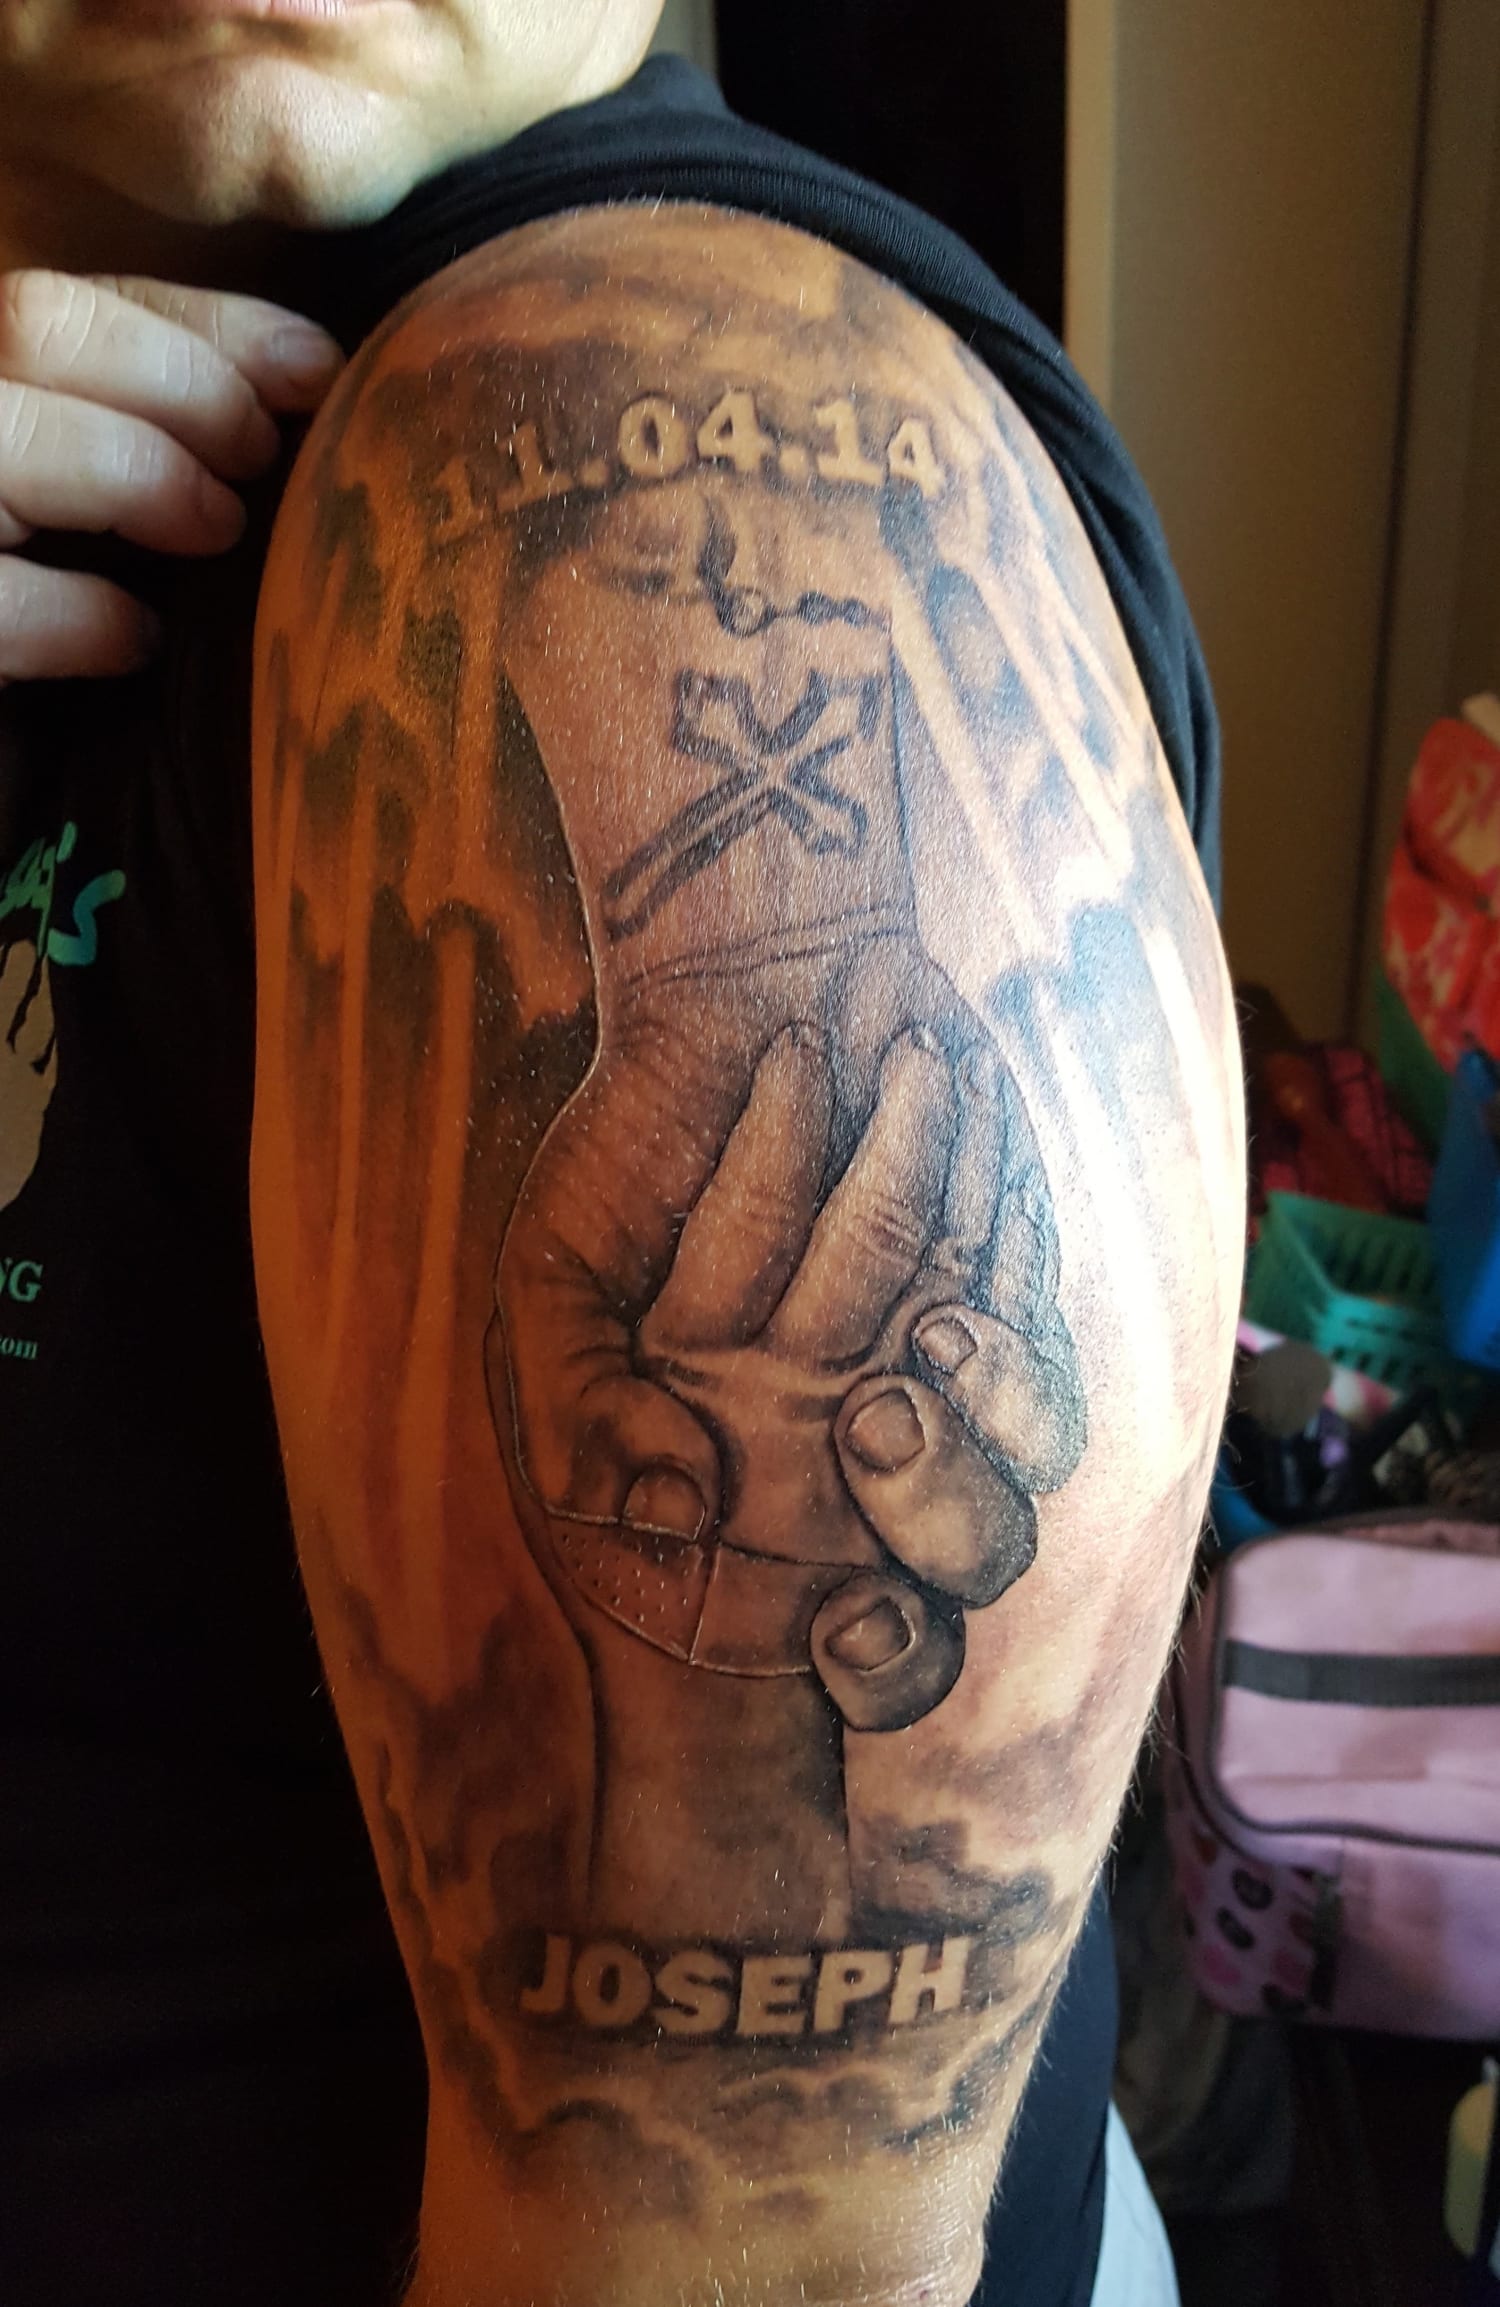 Dad gets touching tribute tattoo after son's death